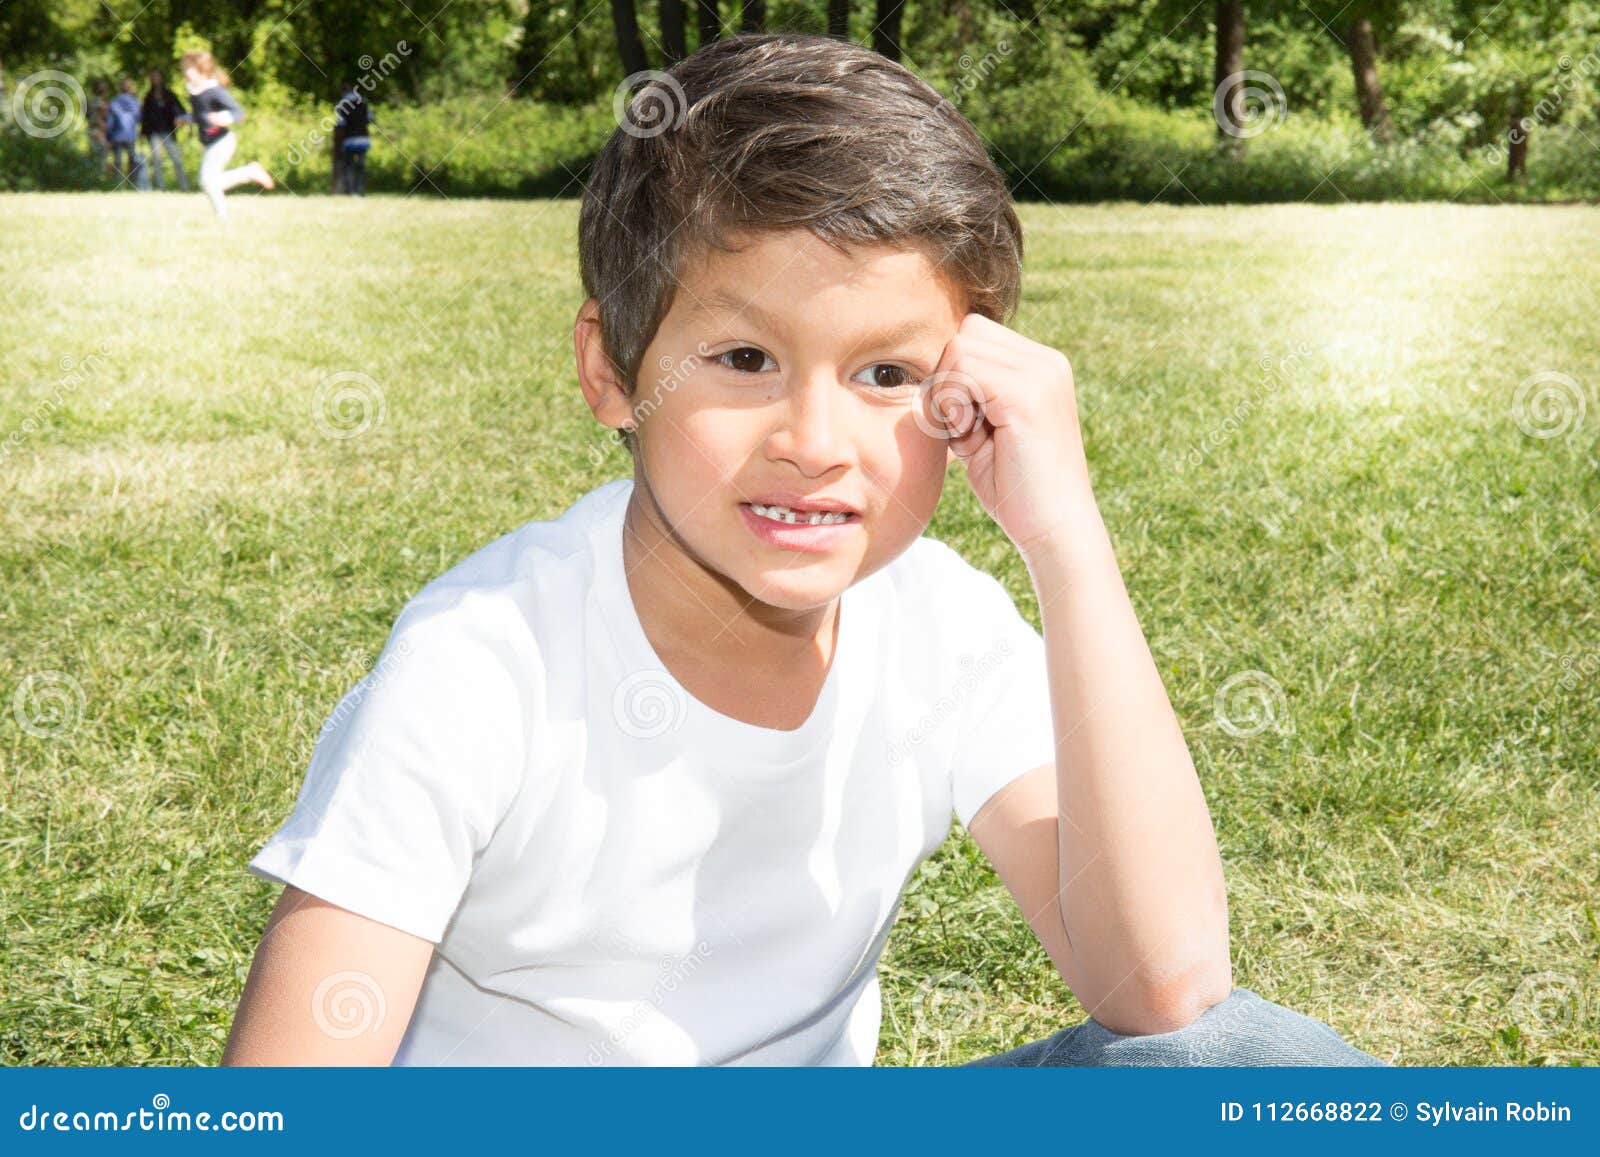 Boy Portrait Mixed Race in the Spring or Summer Park Stock Photo ...